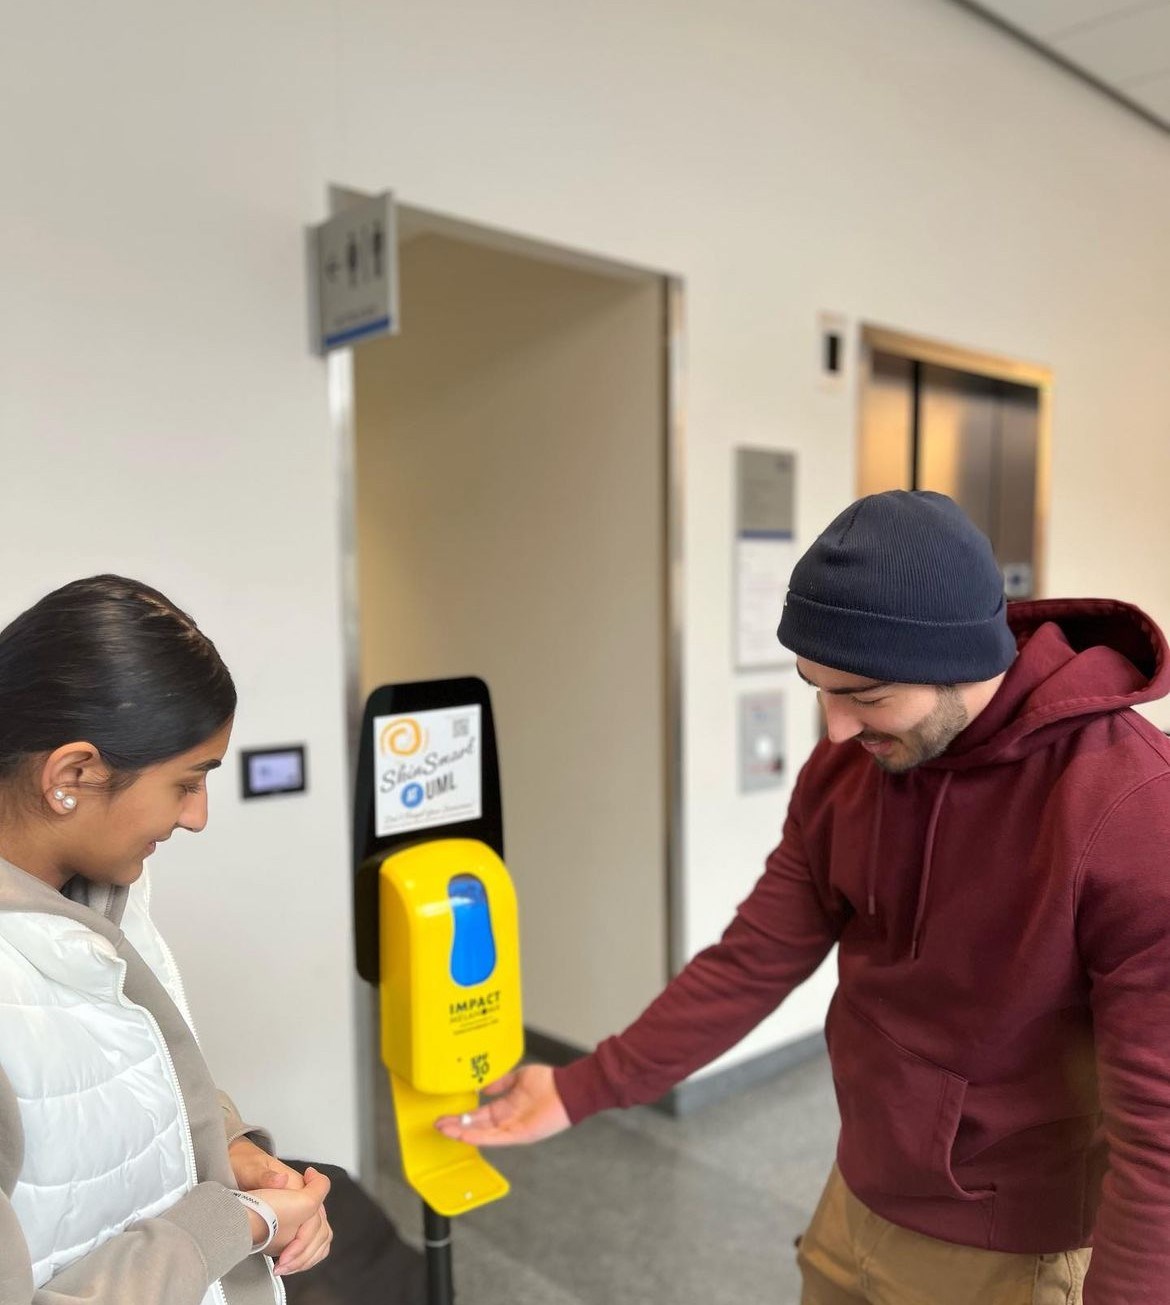 A person shows another how to use an IMPACT melanoma SPF 30 sunscreen dispenser. A sign on the dispenser reads: Skin Smart @ UML.